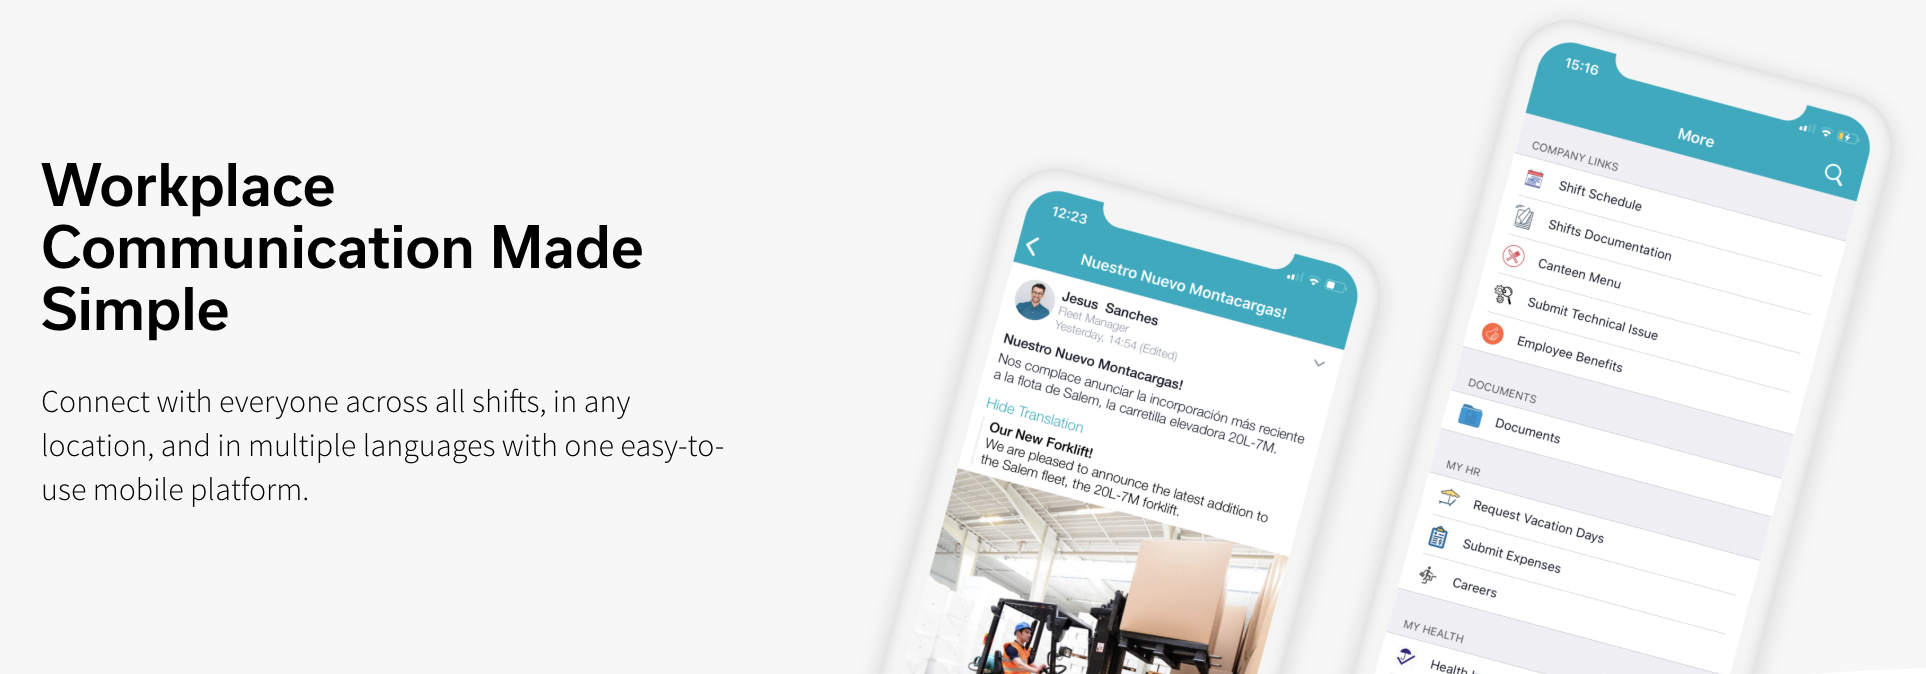 Review Beekeeper: Workplace Communication Made Simple - Appvizer